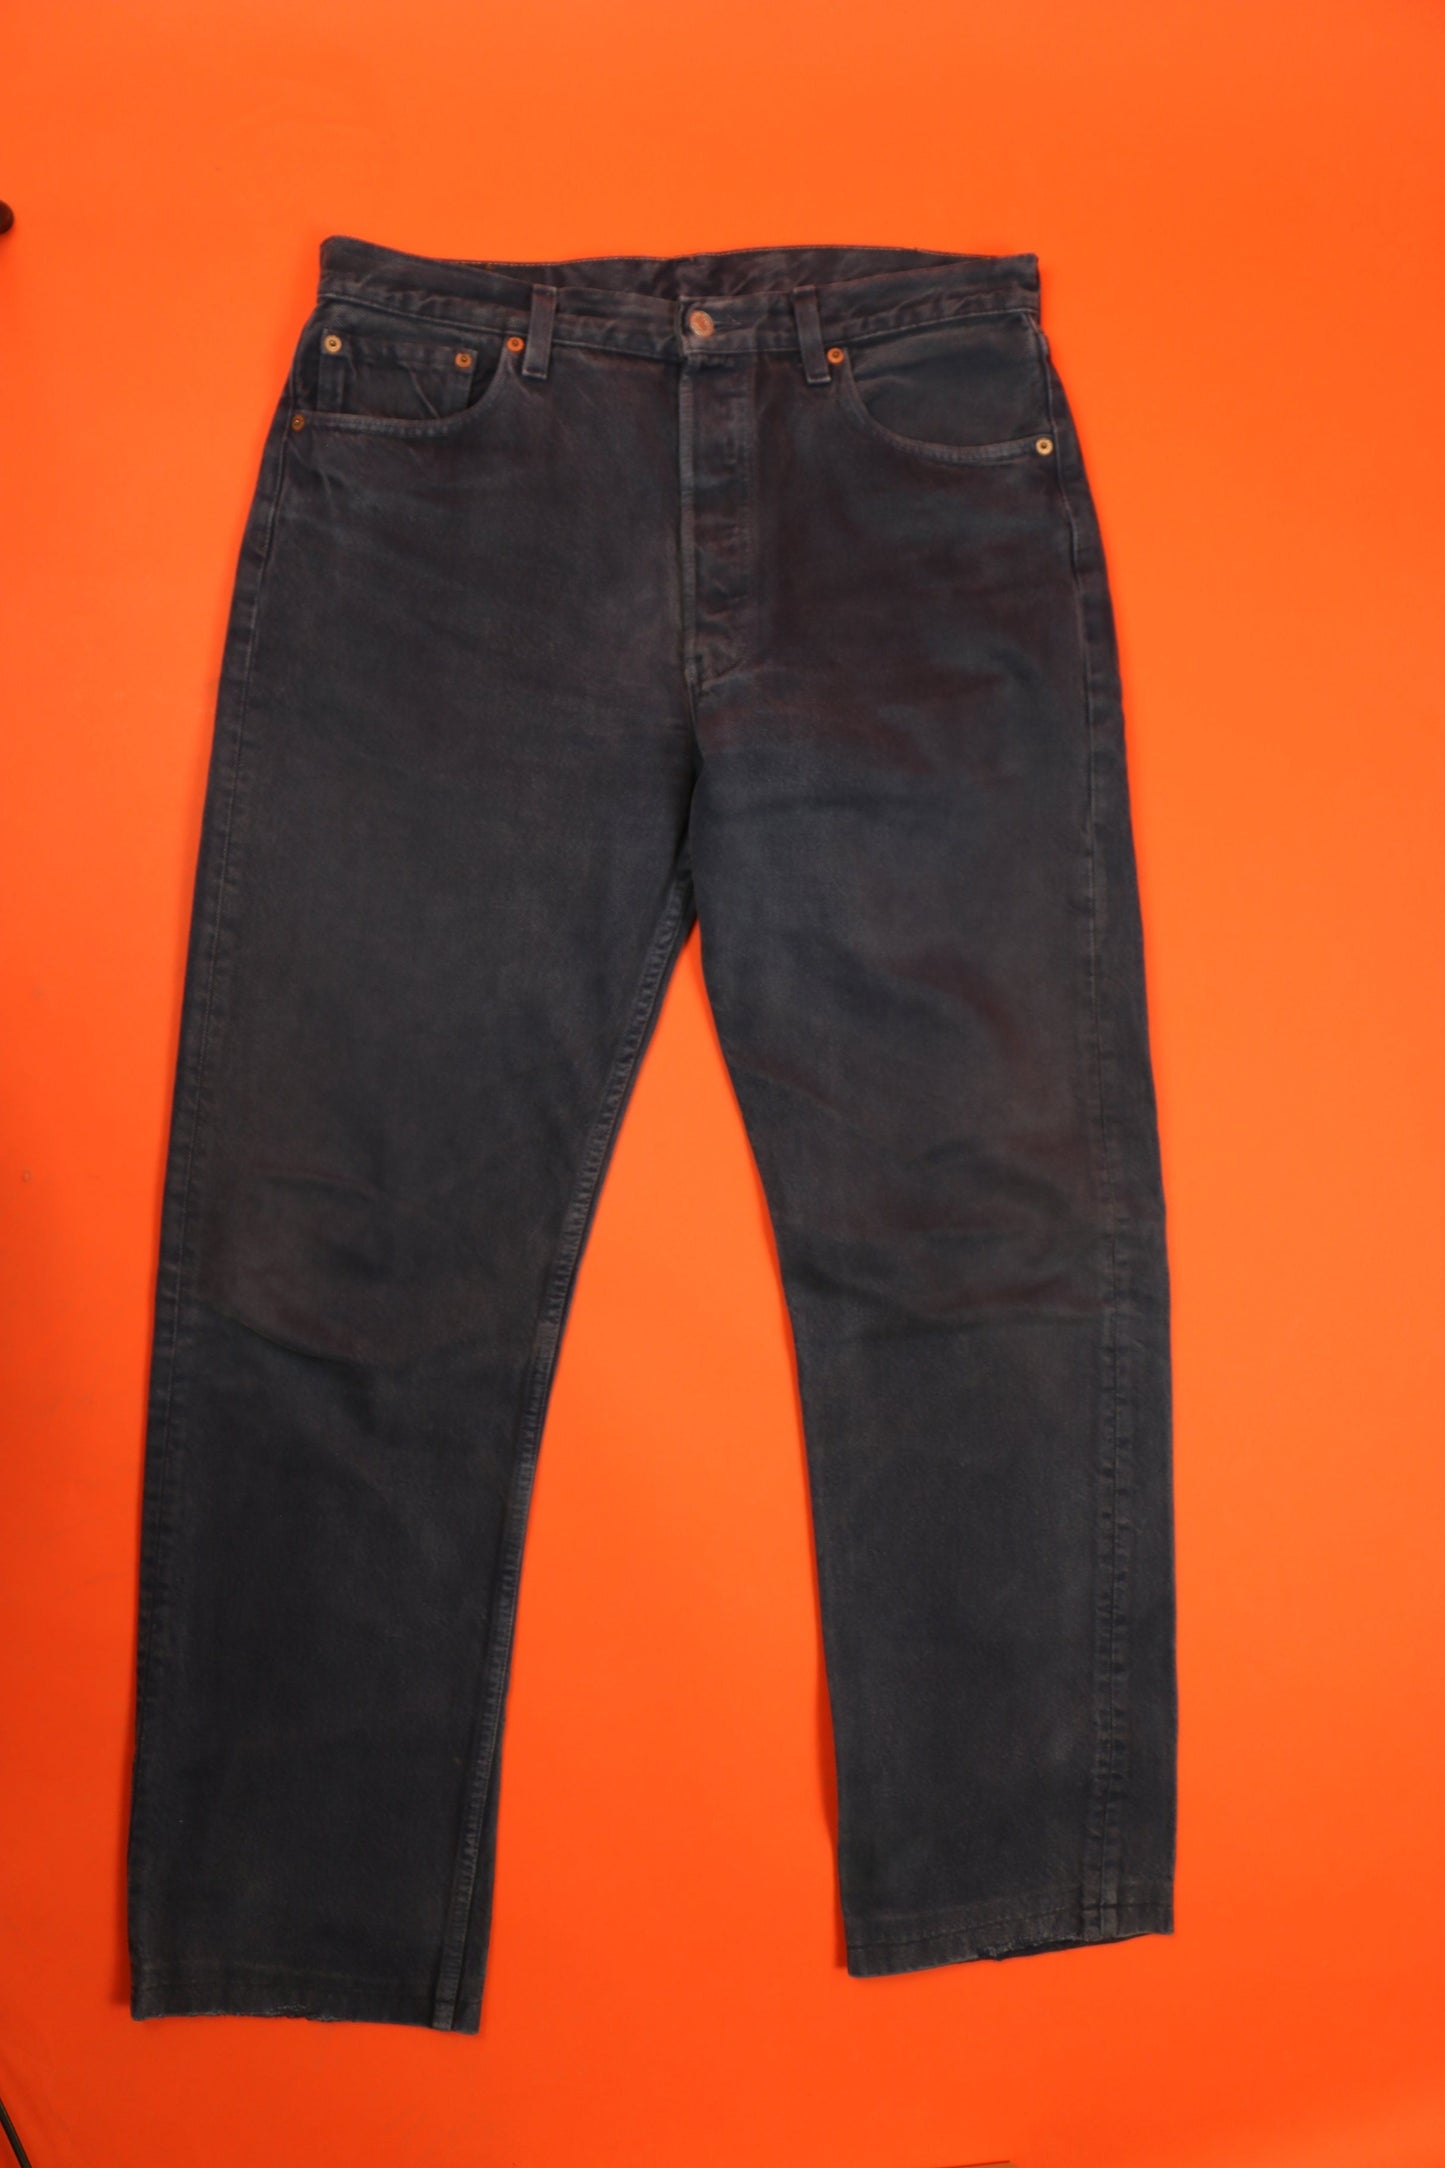 Levi's 501 Jeans Made in U.S.A. 'W34 L36' - vintage clothing clochard92.com